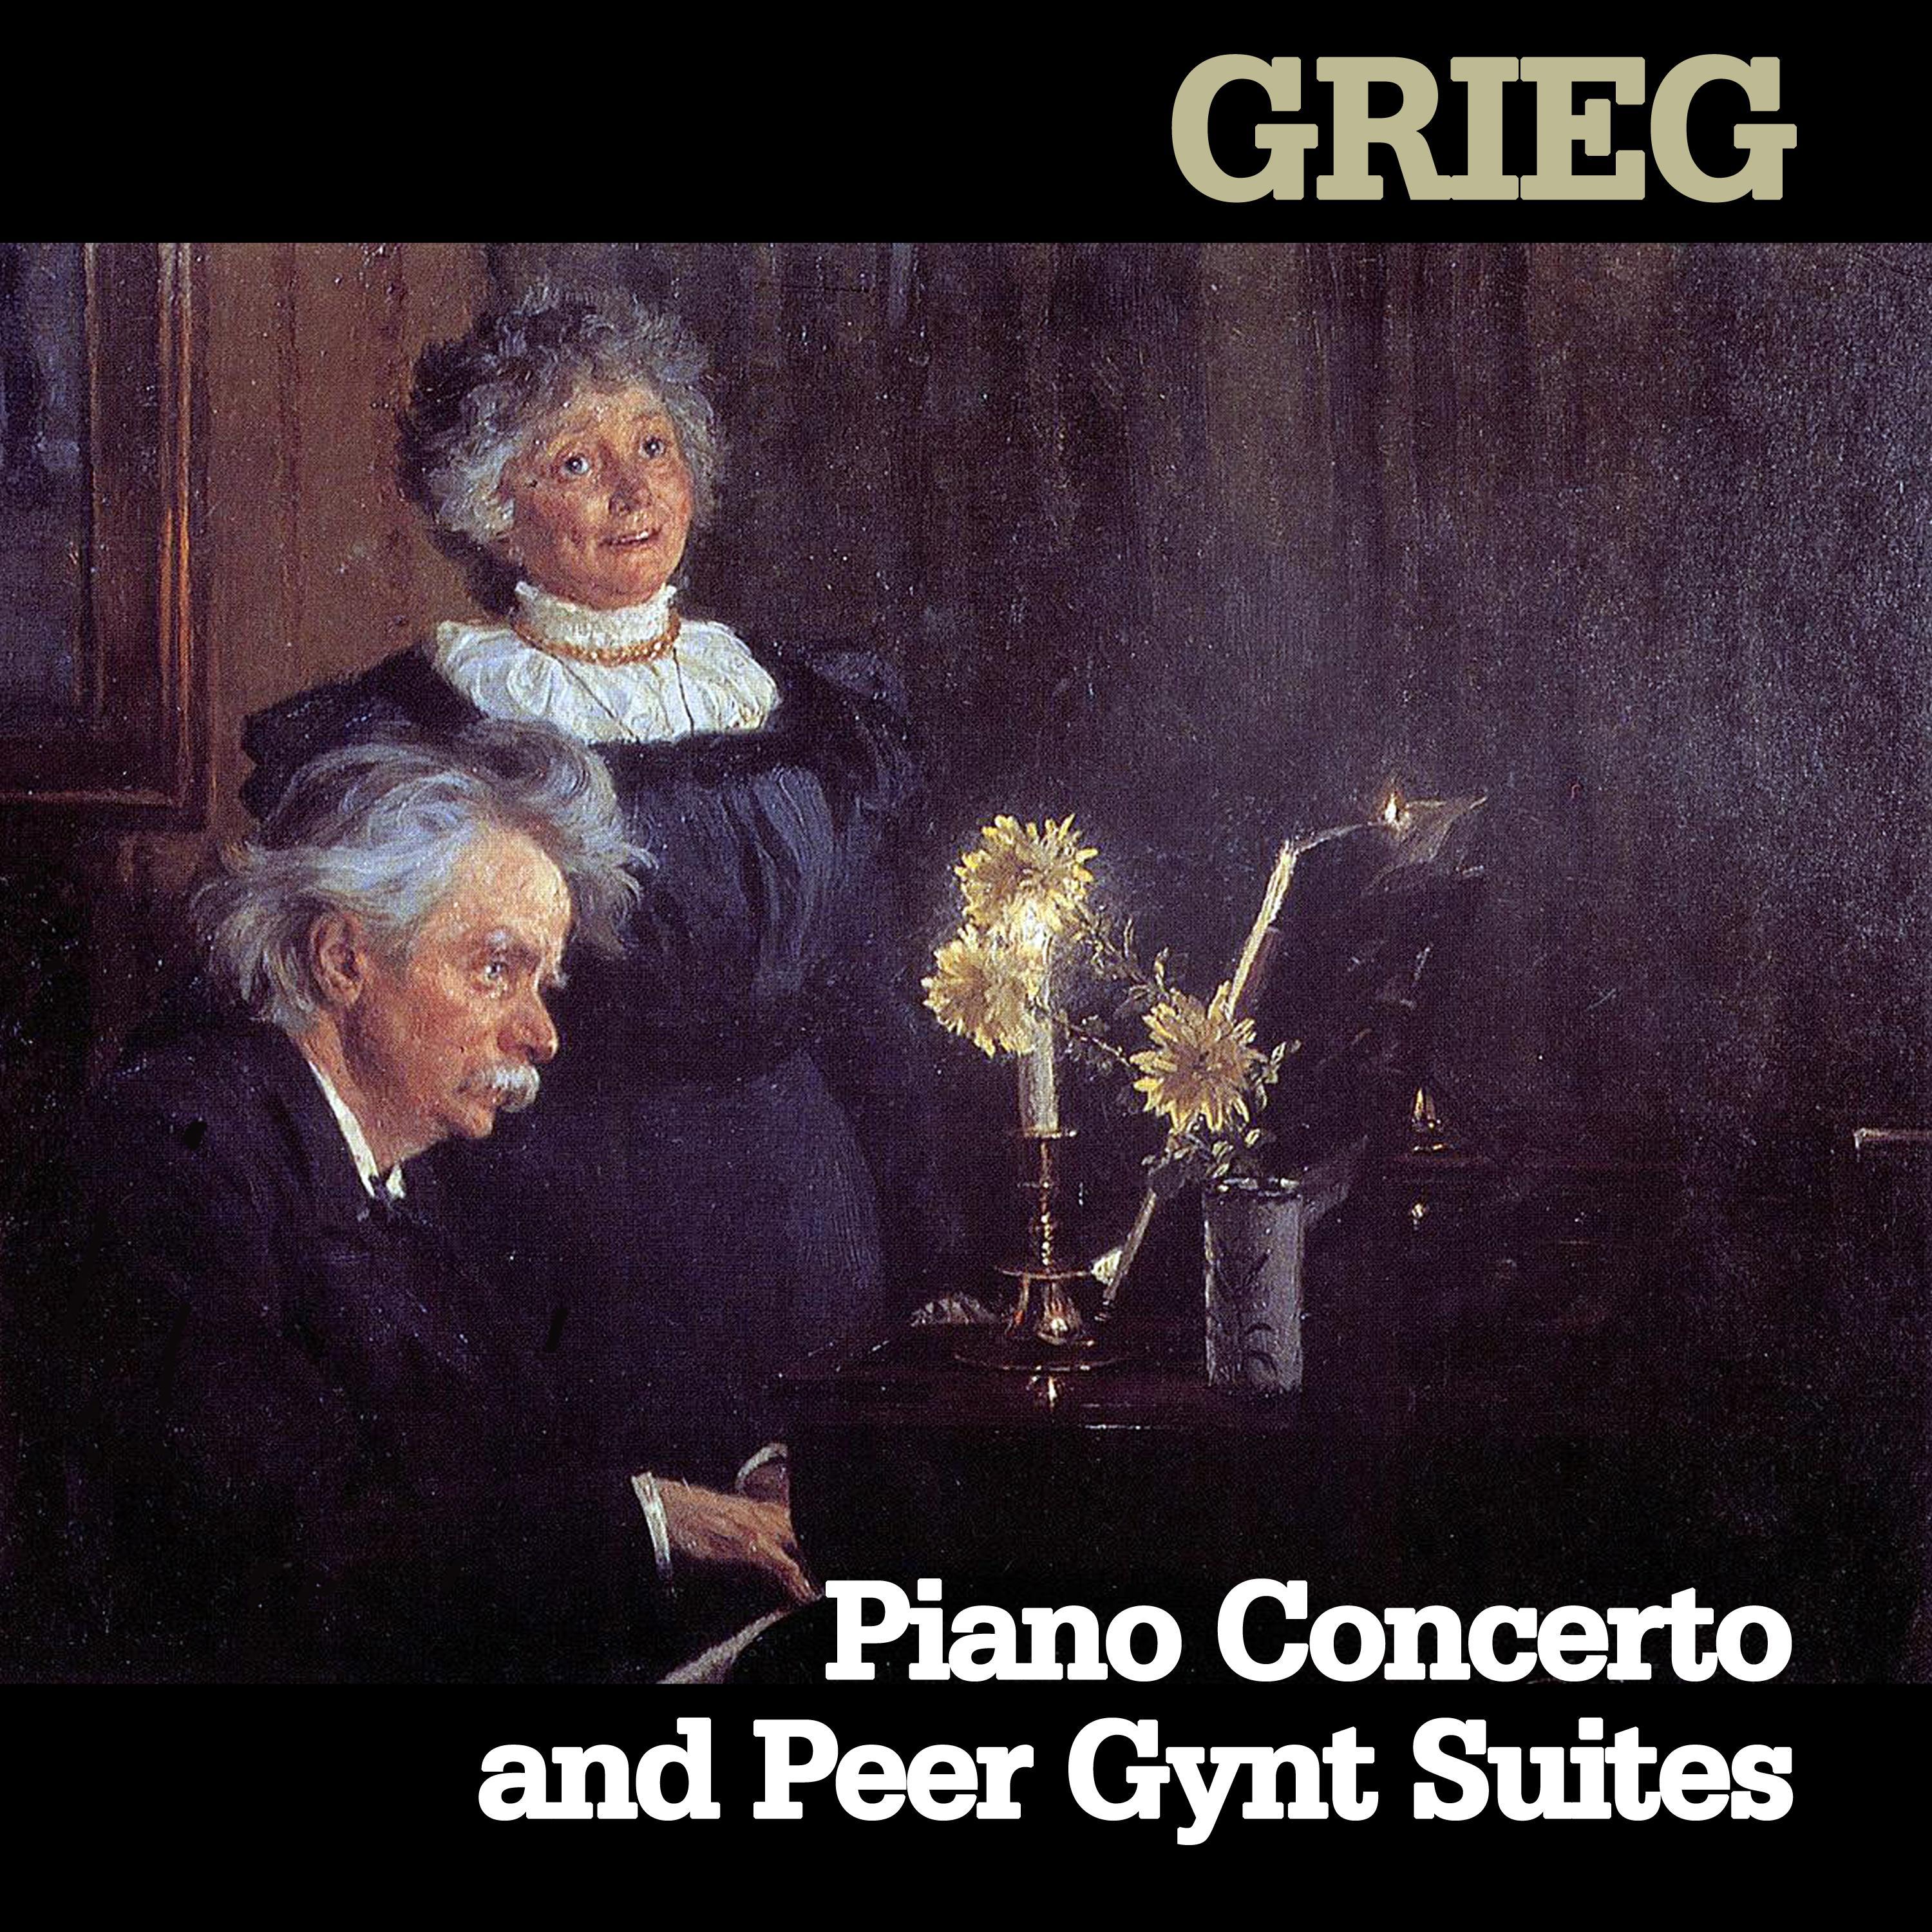 Peer Gynt Suite No. 1, Op. 46: IV. In the hall of the mountain-king